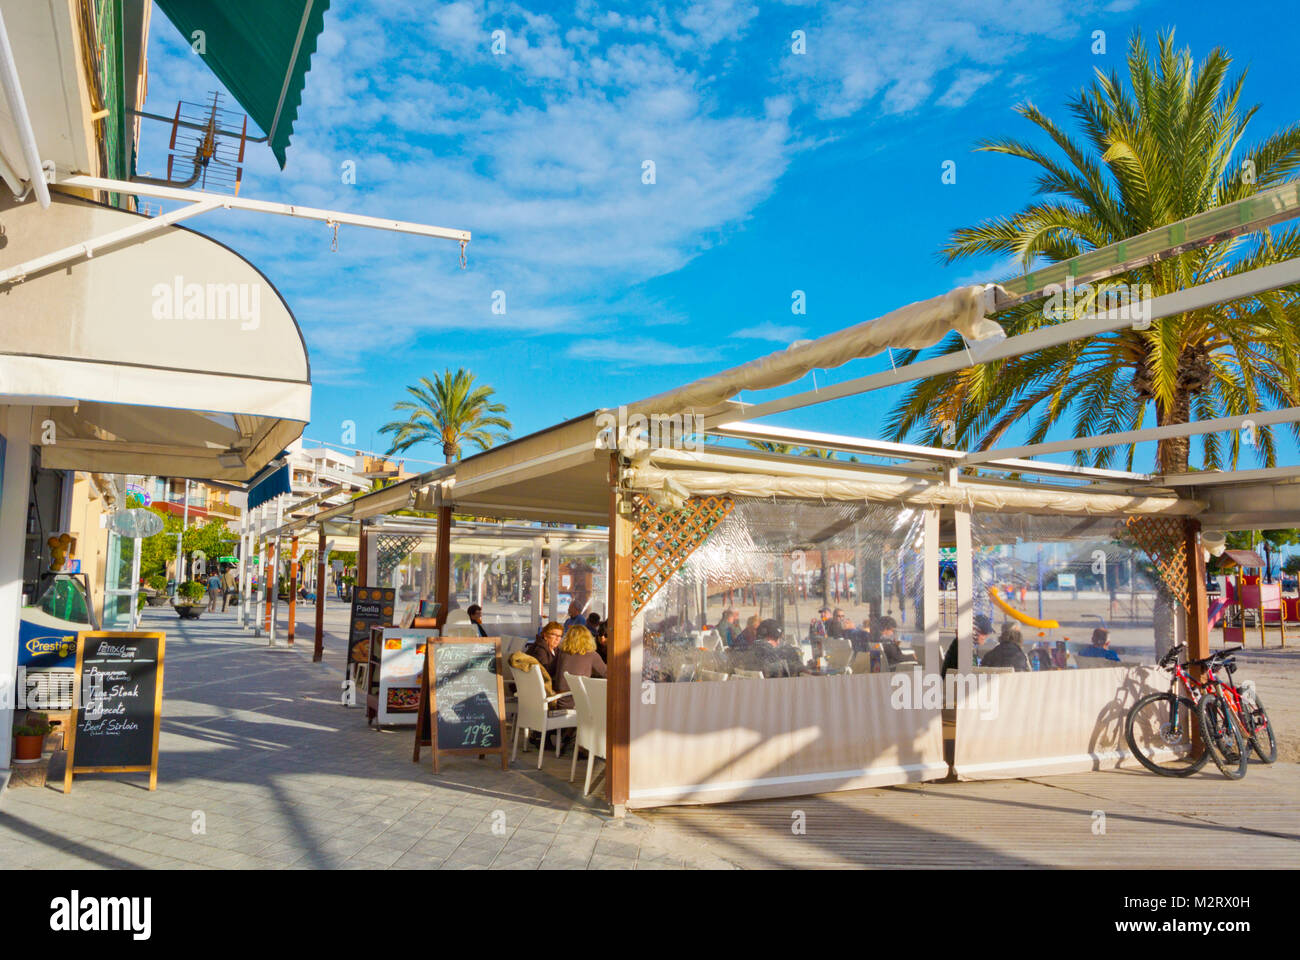 Page 2 - Port de alcudia High Resolution Stock Photography and Images -  Alamy